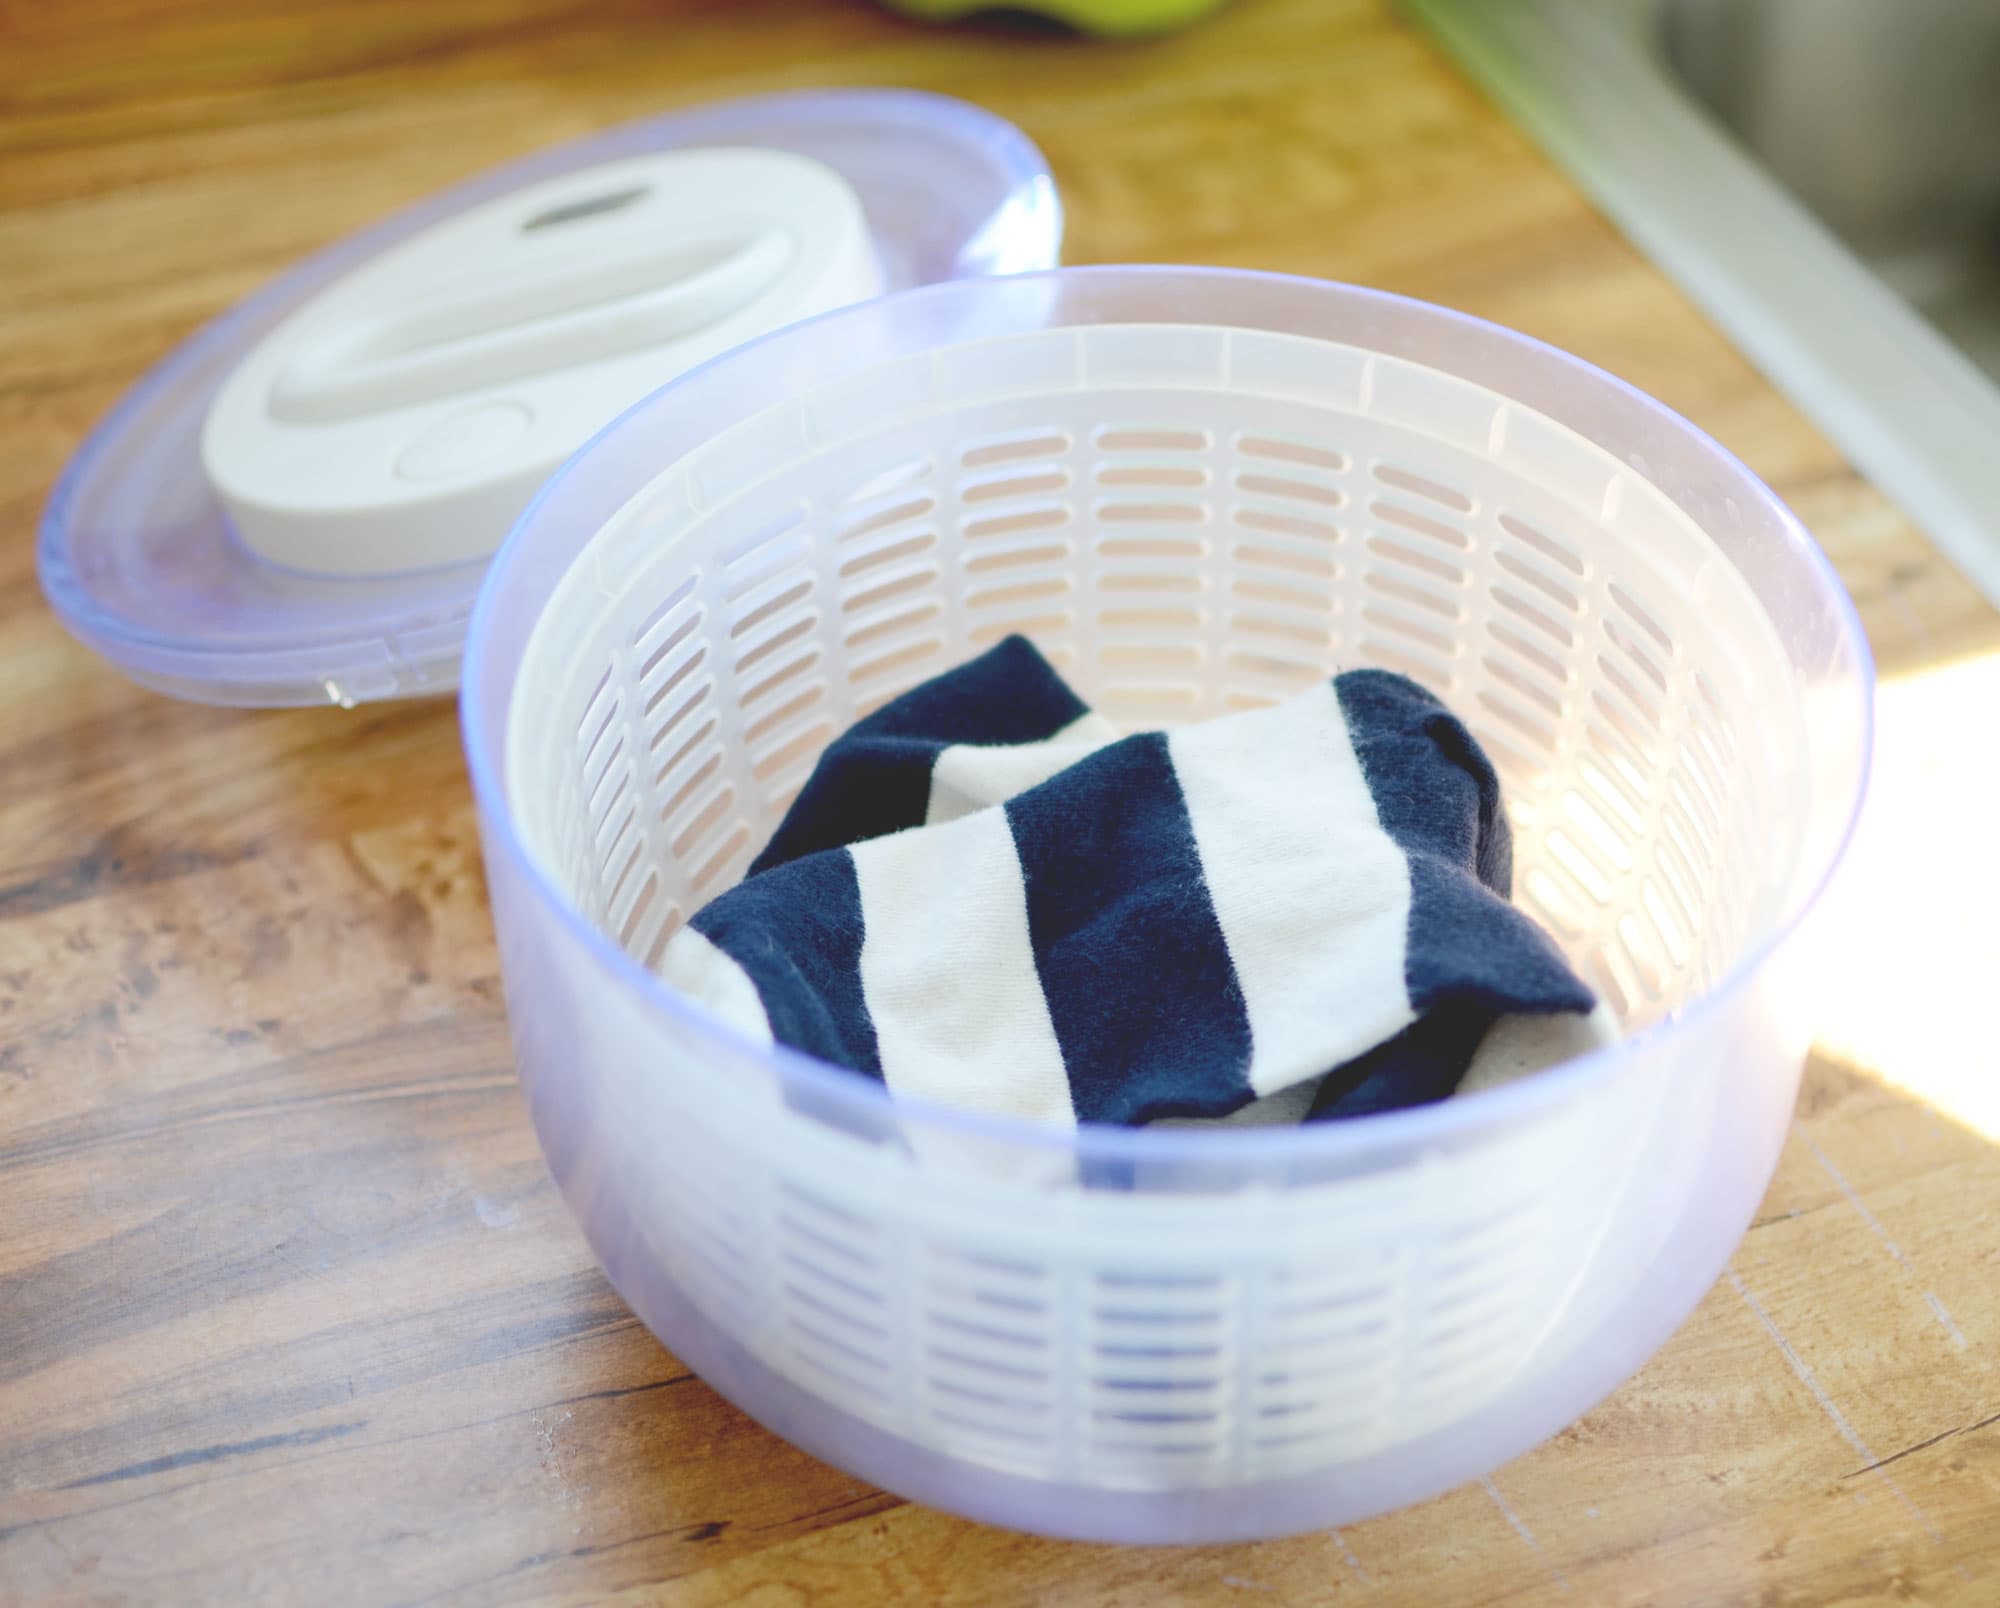 No Salad Spinner, No Problem. Here's What To Use Instead